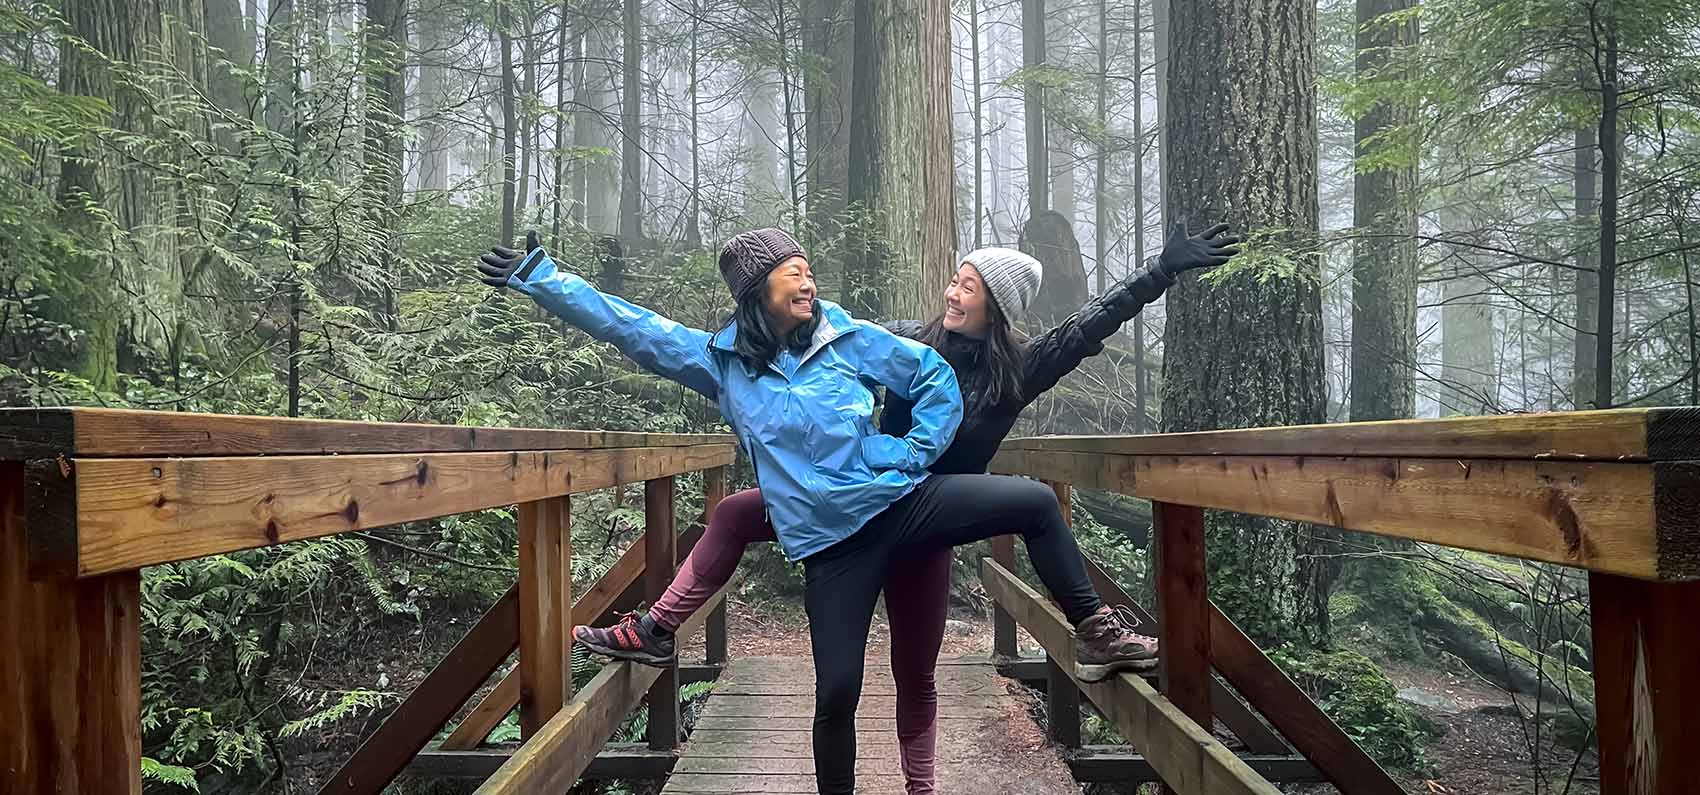 mother and daughter posing on bridge in a forest on Mount Seymour, North Vancouver, British Columbia, Canada